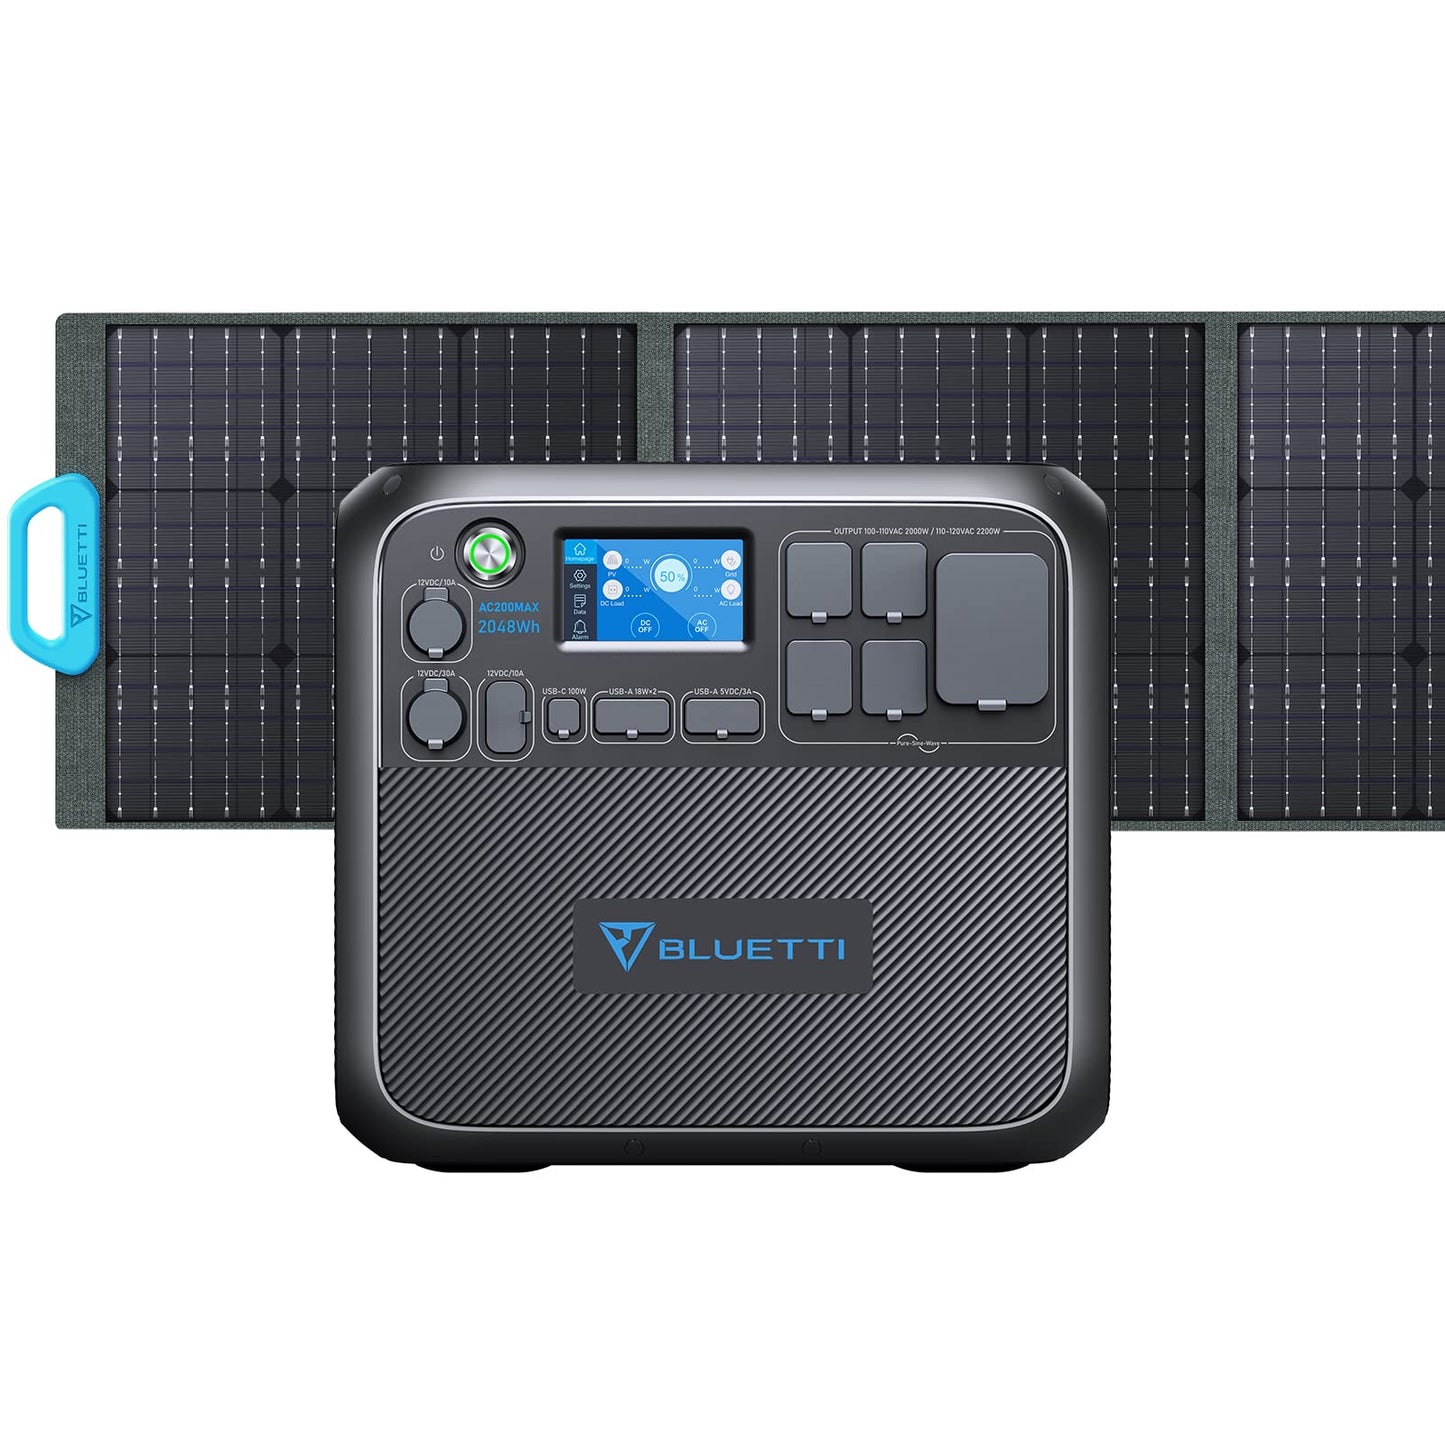 BLUETTI Solar Generator AC200MAX with PV200 Solar Panel Included, 2048Wh Portable Power Station w/ 4 2200W AC Outlets, LiFePO4 Battery Pack, Expandable to 8192Wh for Home Backup, RV Camping Emergency